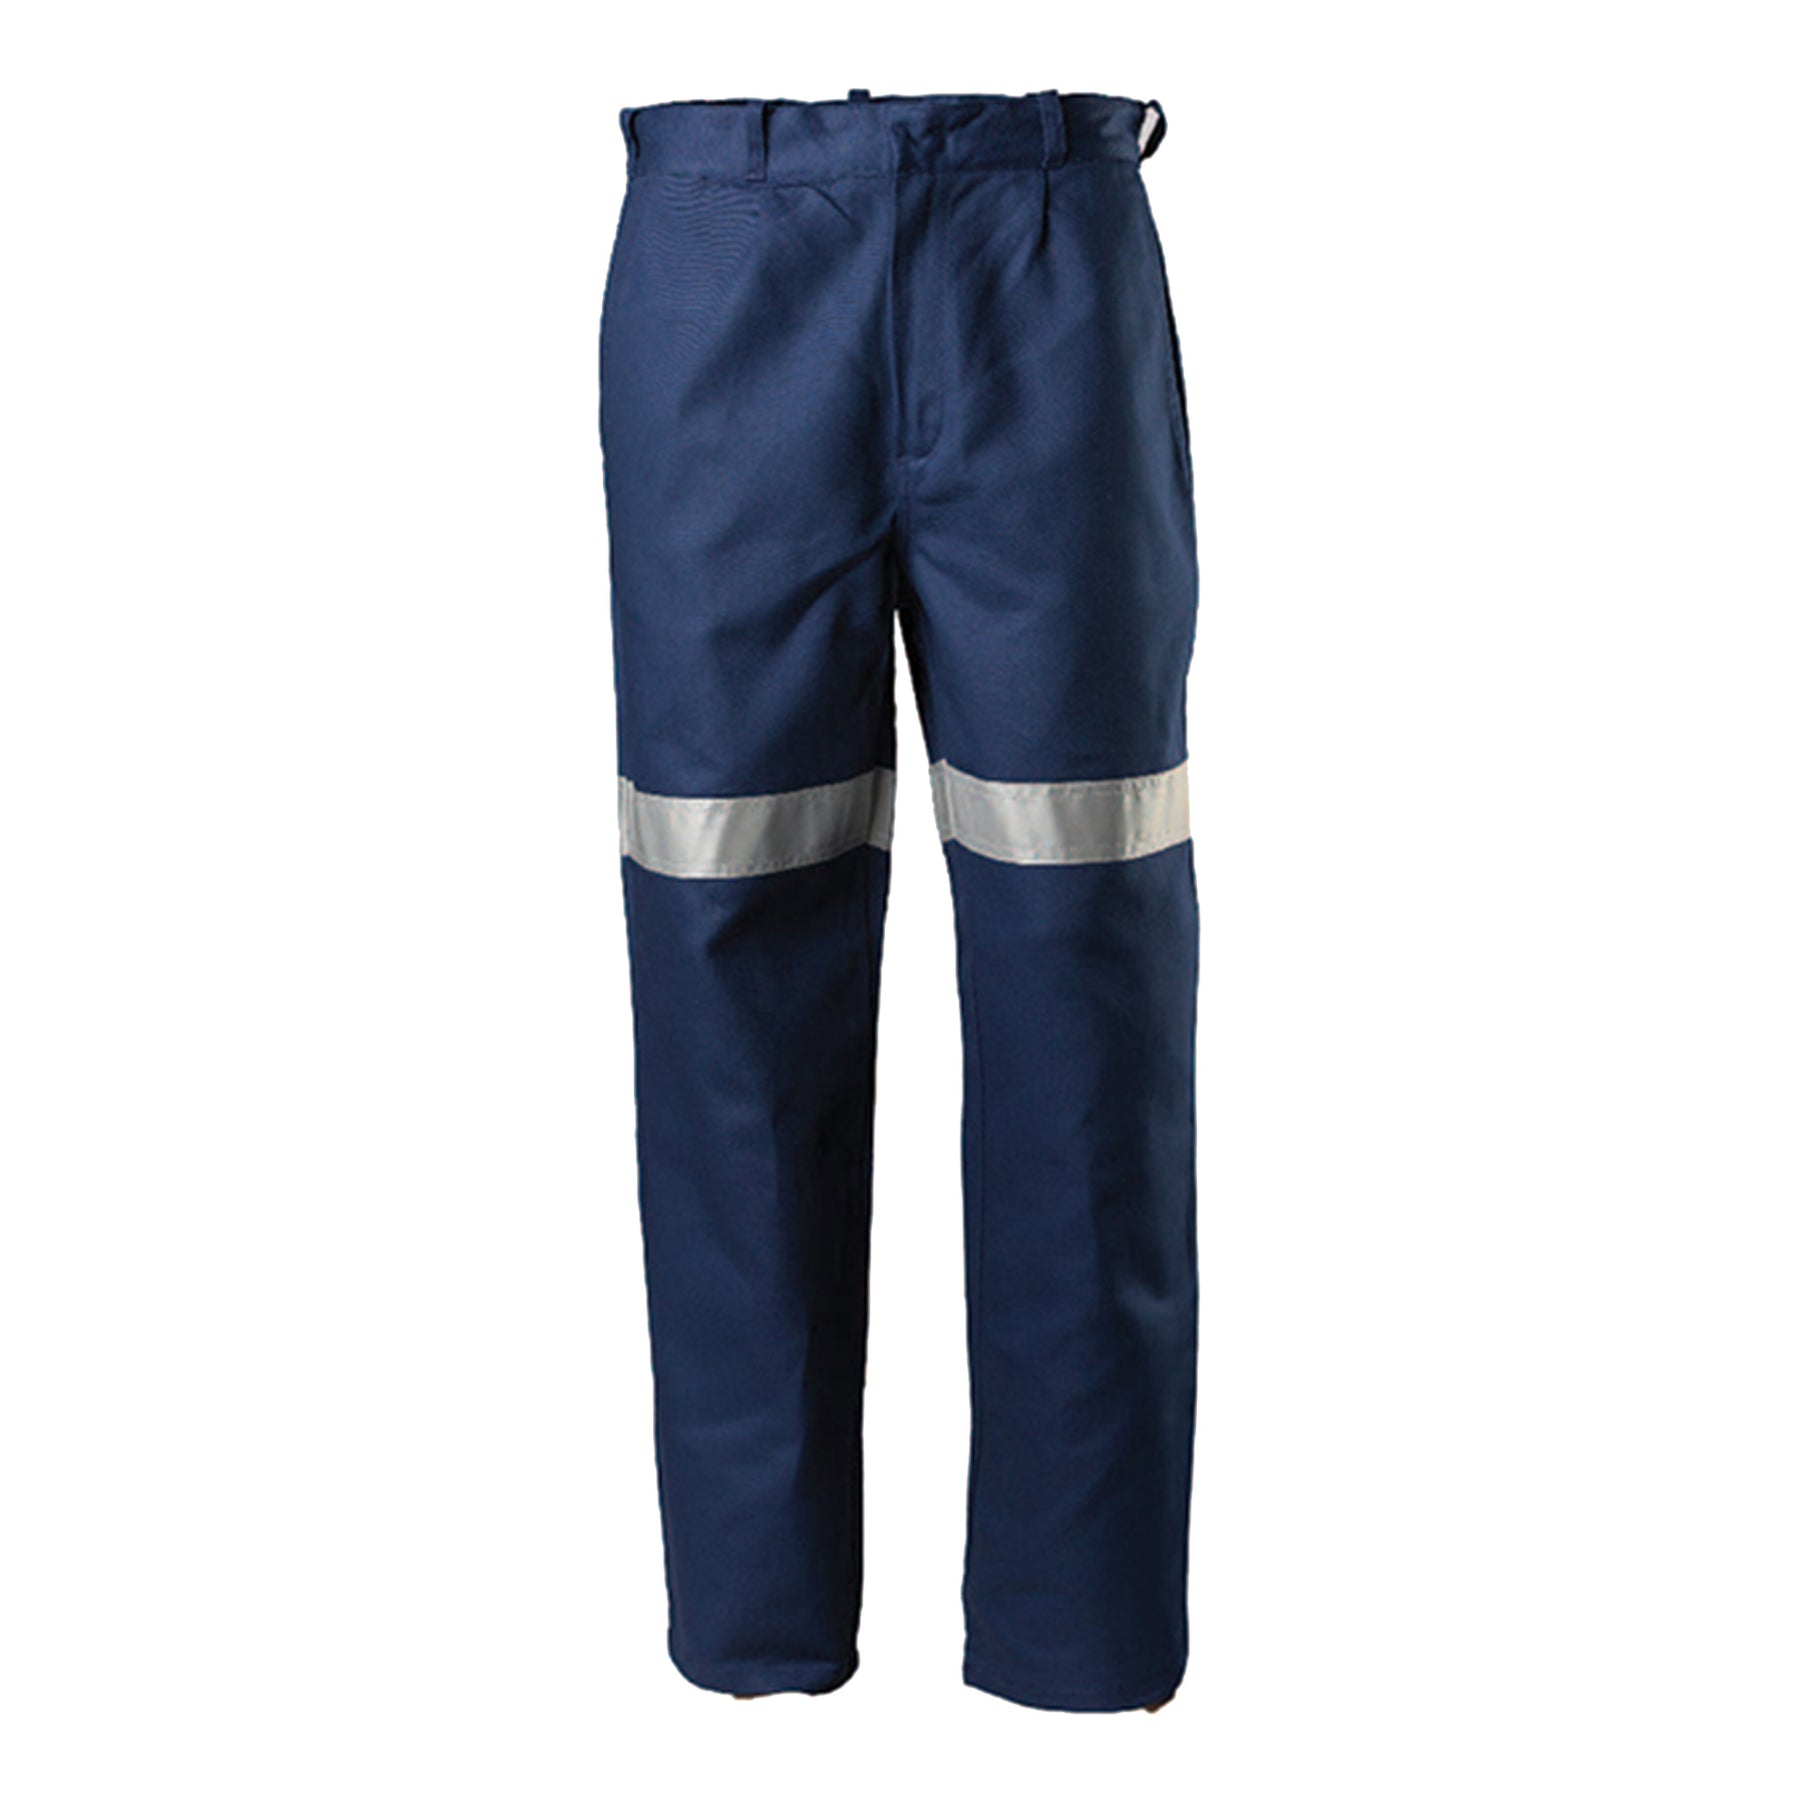 lightweight cotton work trousers with 3m tape in navy